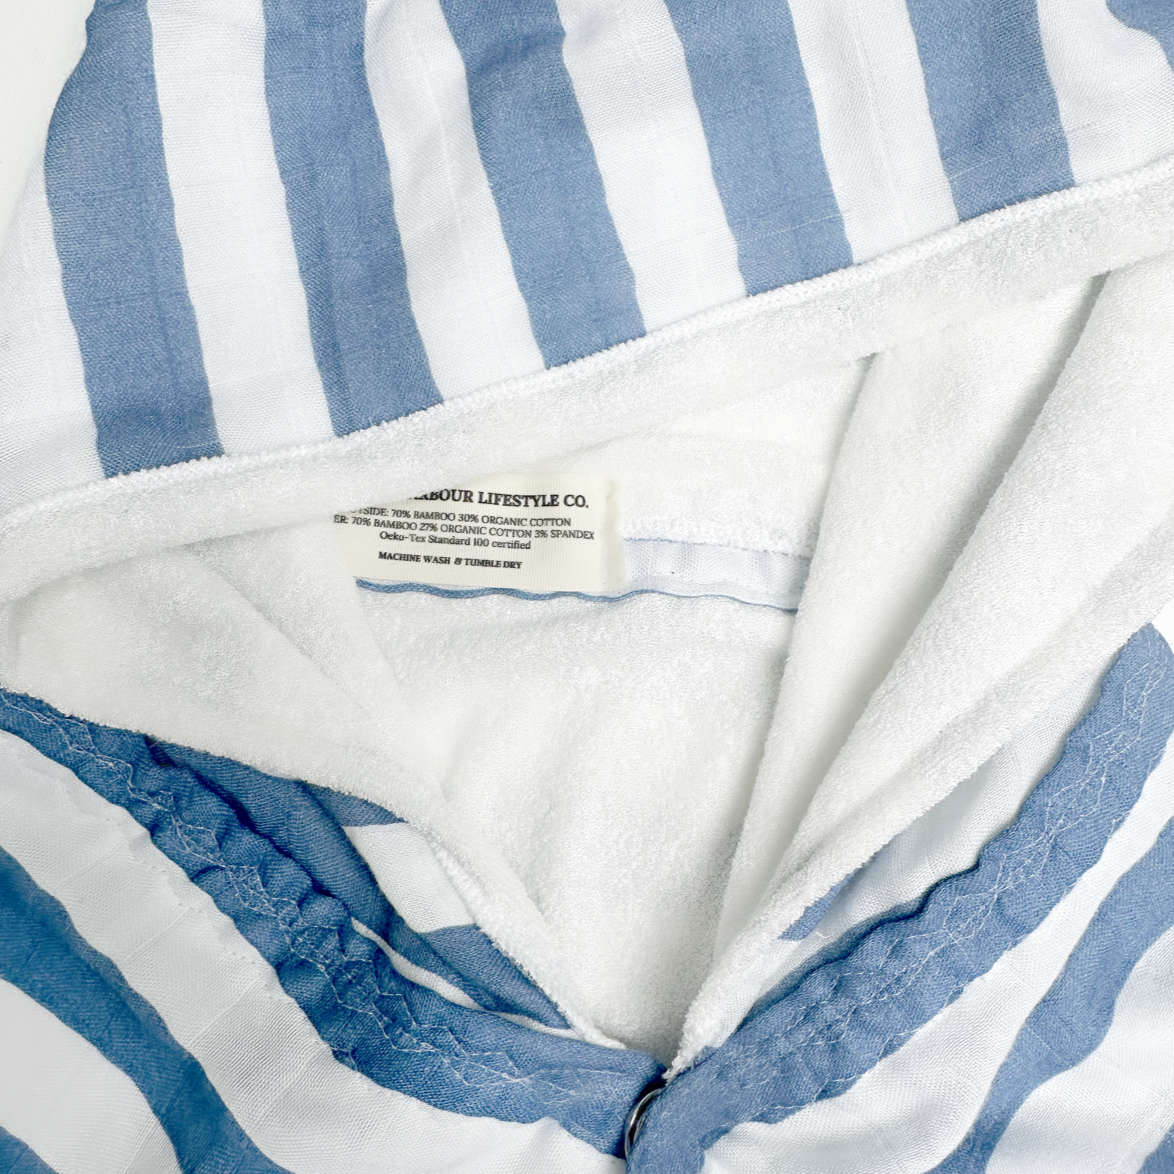 The Kids Cloud Towel - Blue & White Stripe - Friday Harbour Lifestyle Company 